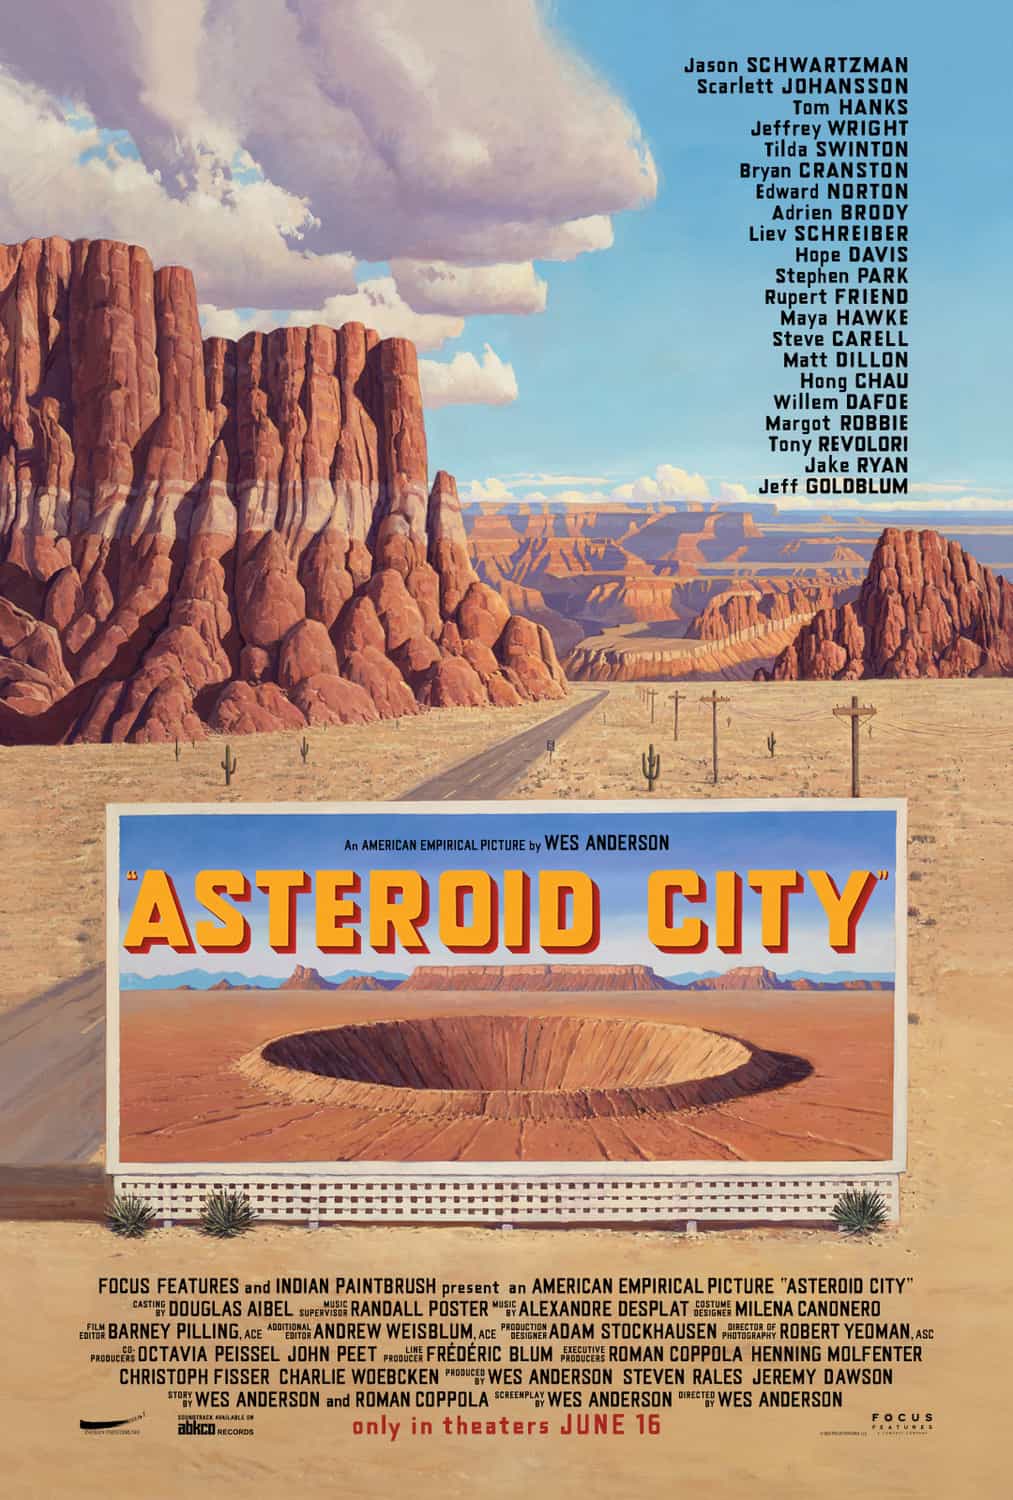 New poster has been released for Asteroid City which stars Margot Robbie and Tom Hanks - movie UK release date 23rd June 2023 #asteroidcity